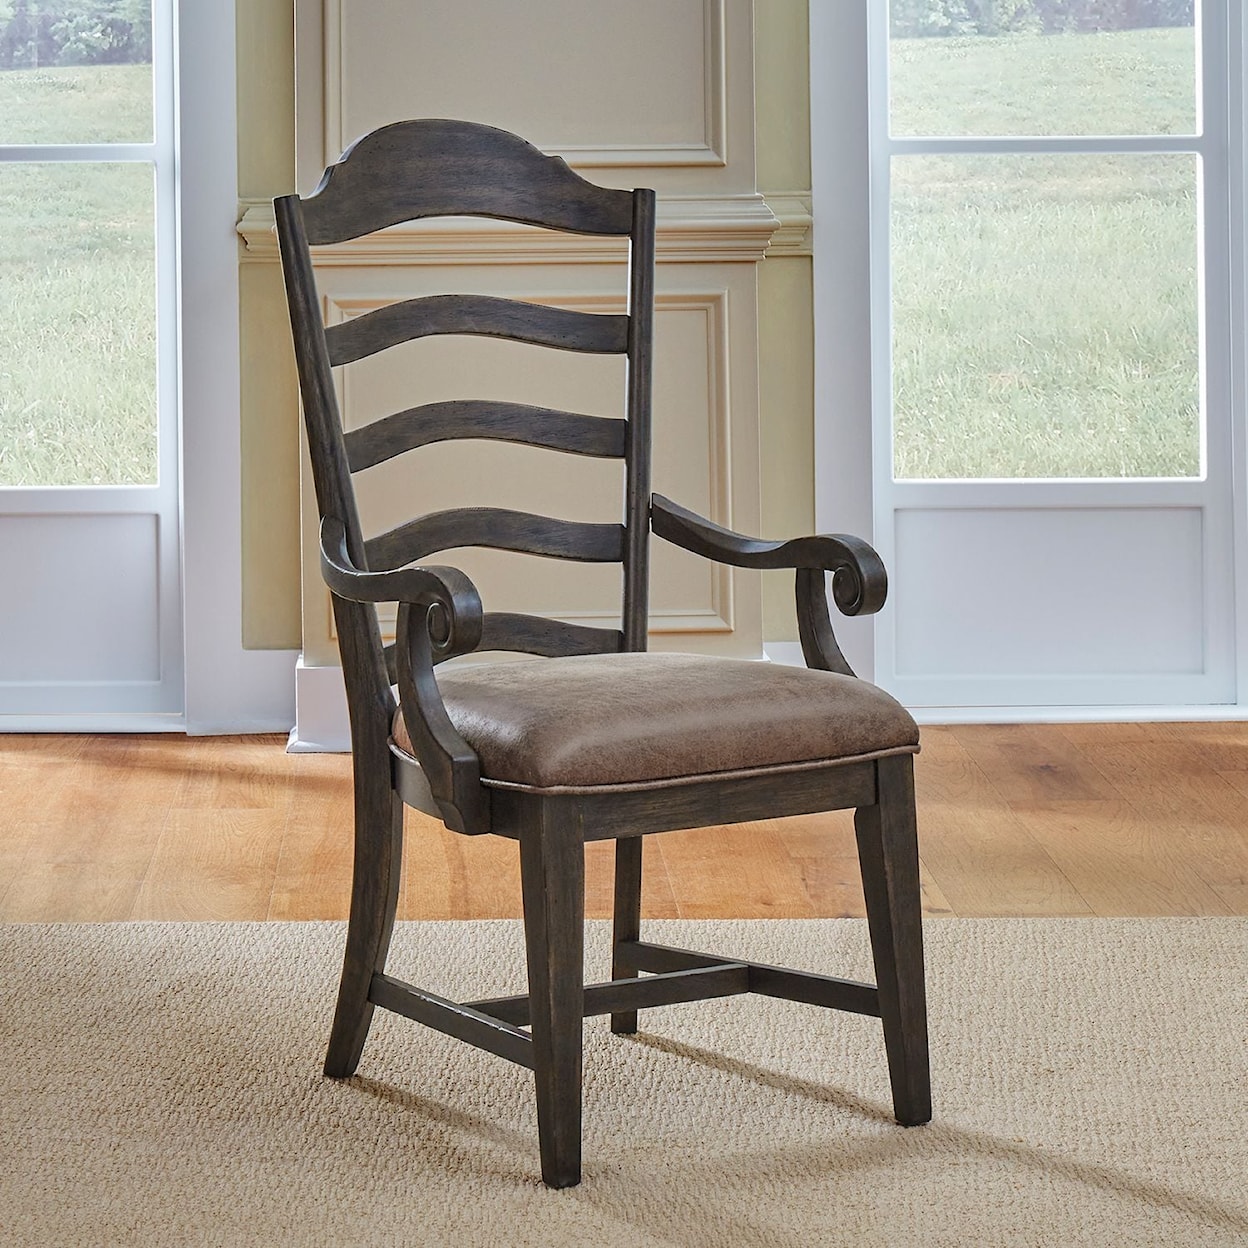 Libby Paradise Valley Upholstered Ladder-Back Arm Chair